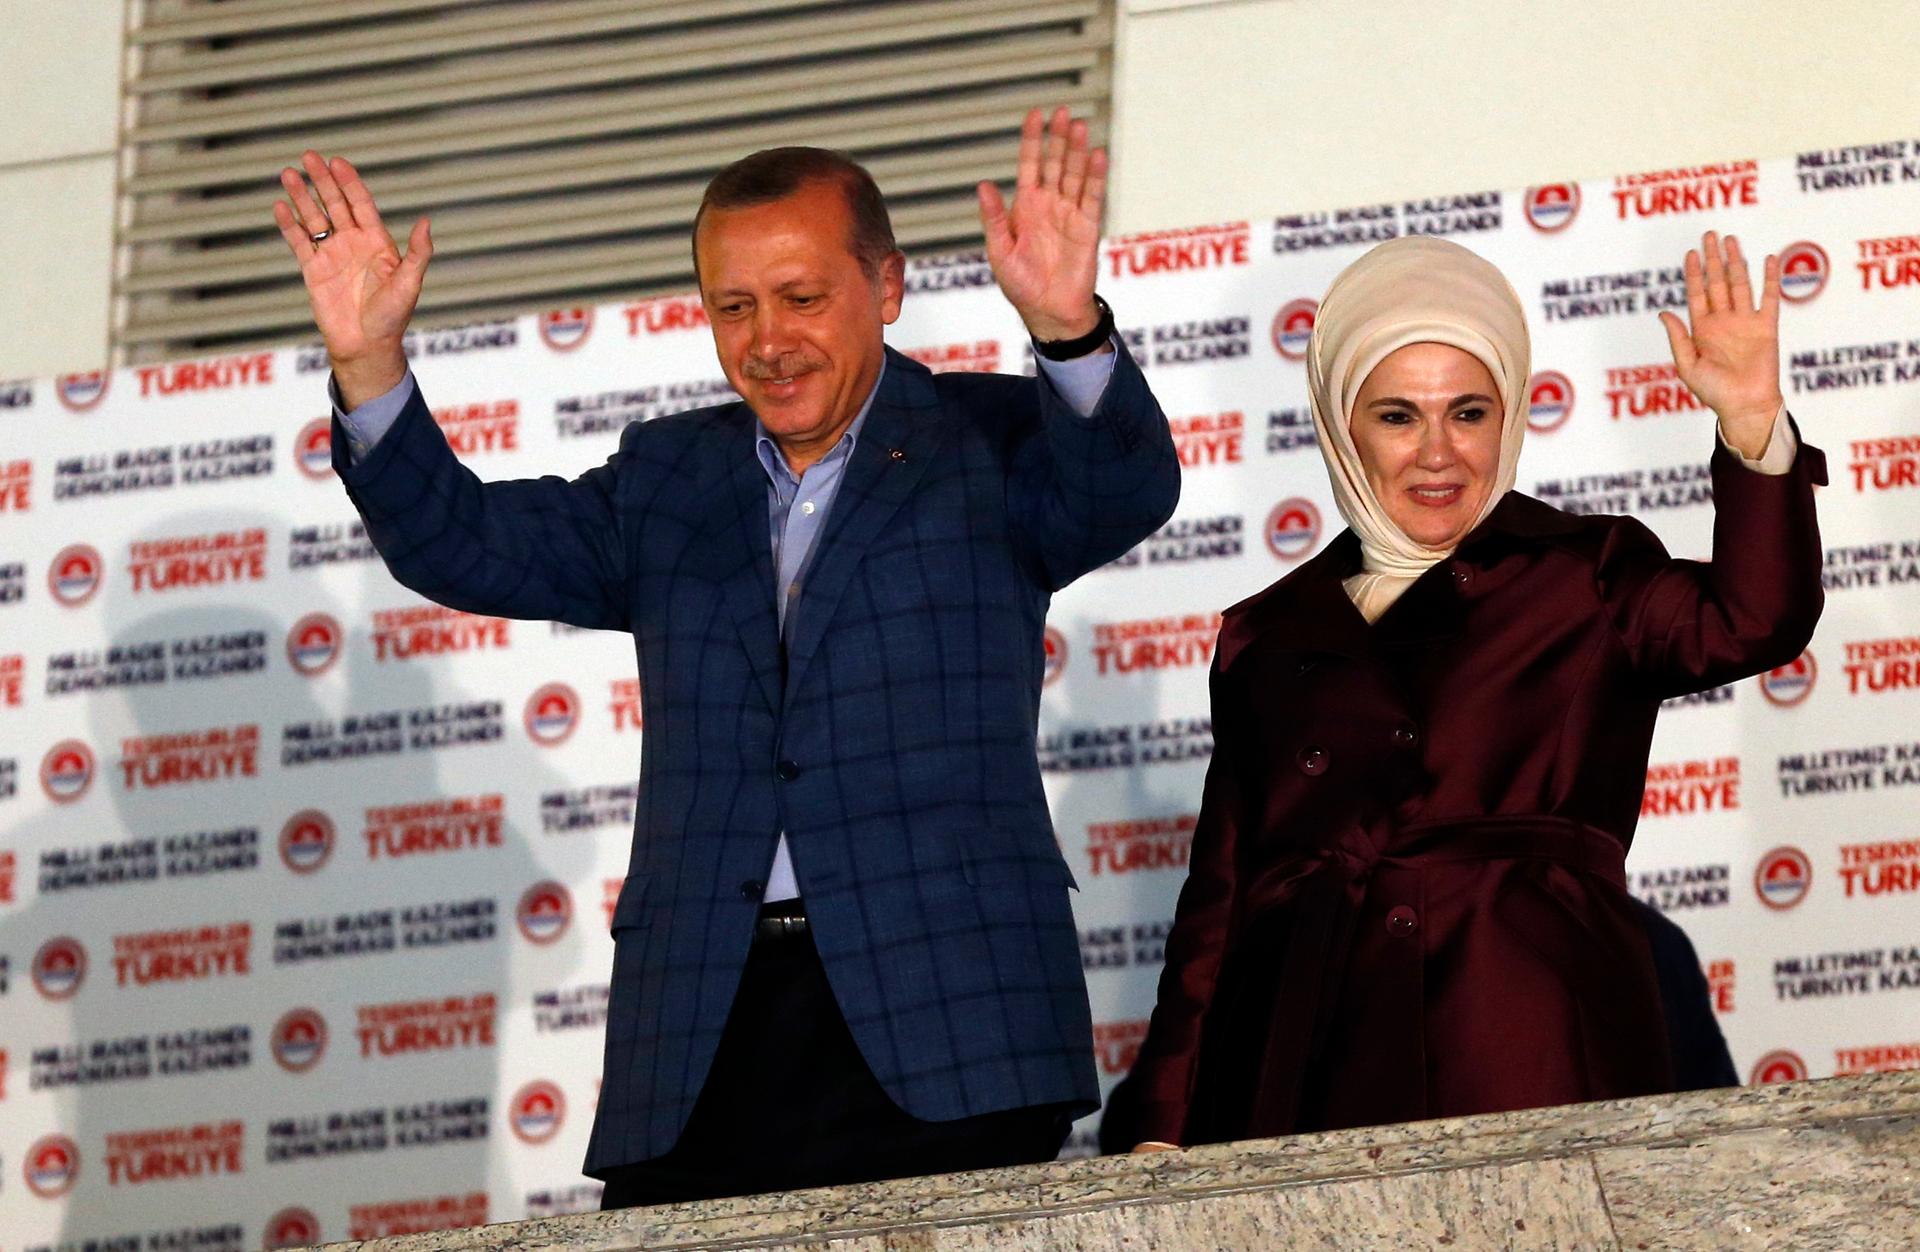 Recep Tayyip Erdogan, Turkey's Prime Minister, and his wife, Ermine, wave hands to supporters as they celebrate his election victory in front of the Justice and Development party headquarters in Ankara on August 10, 2014.